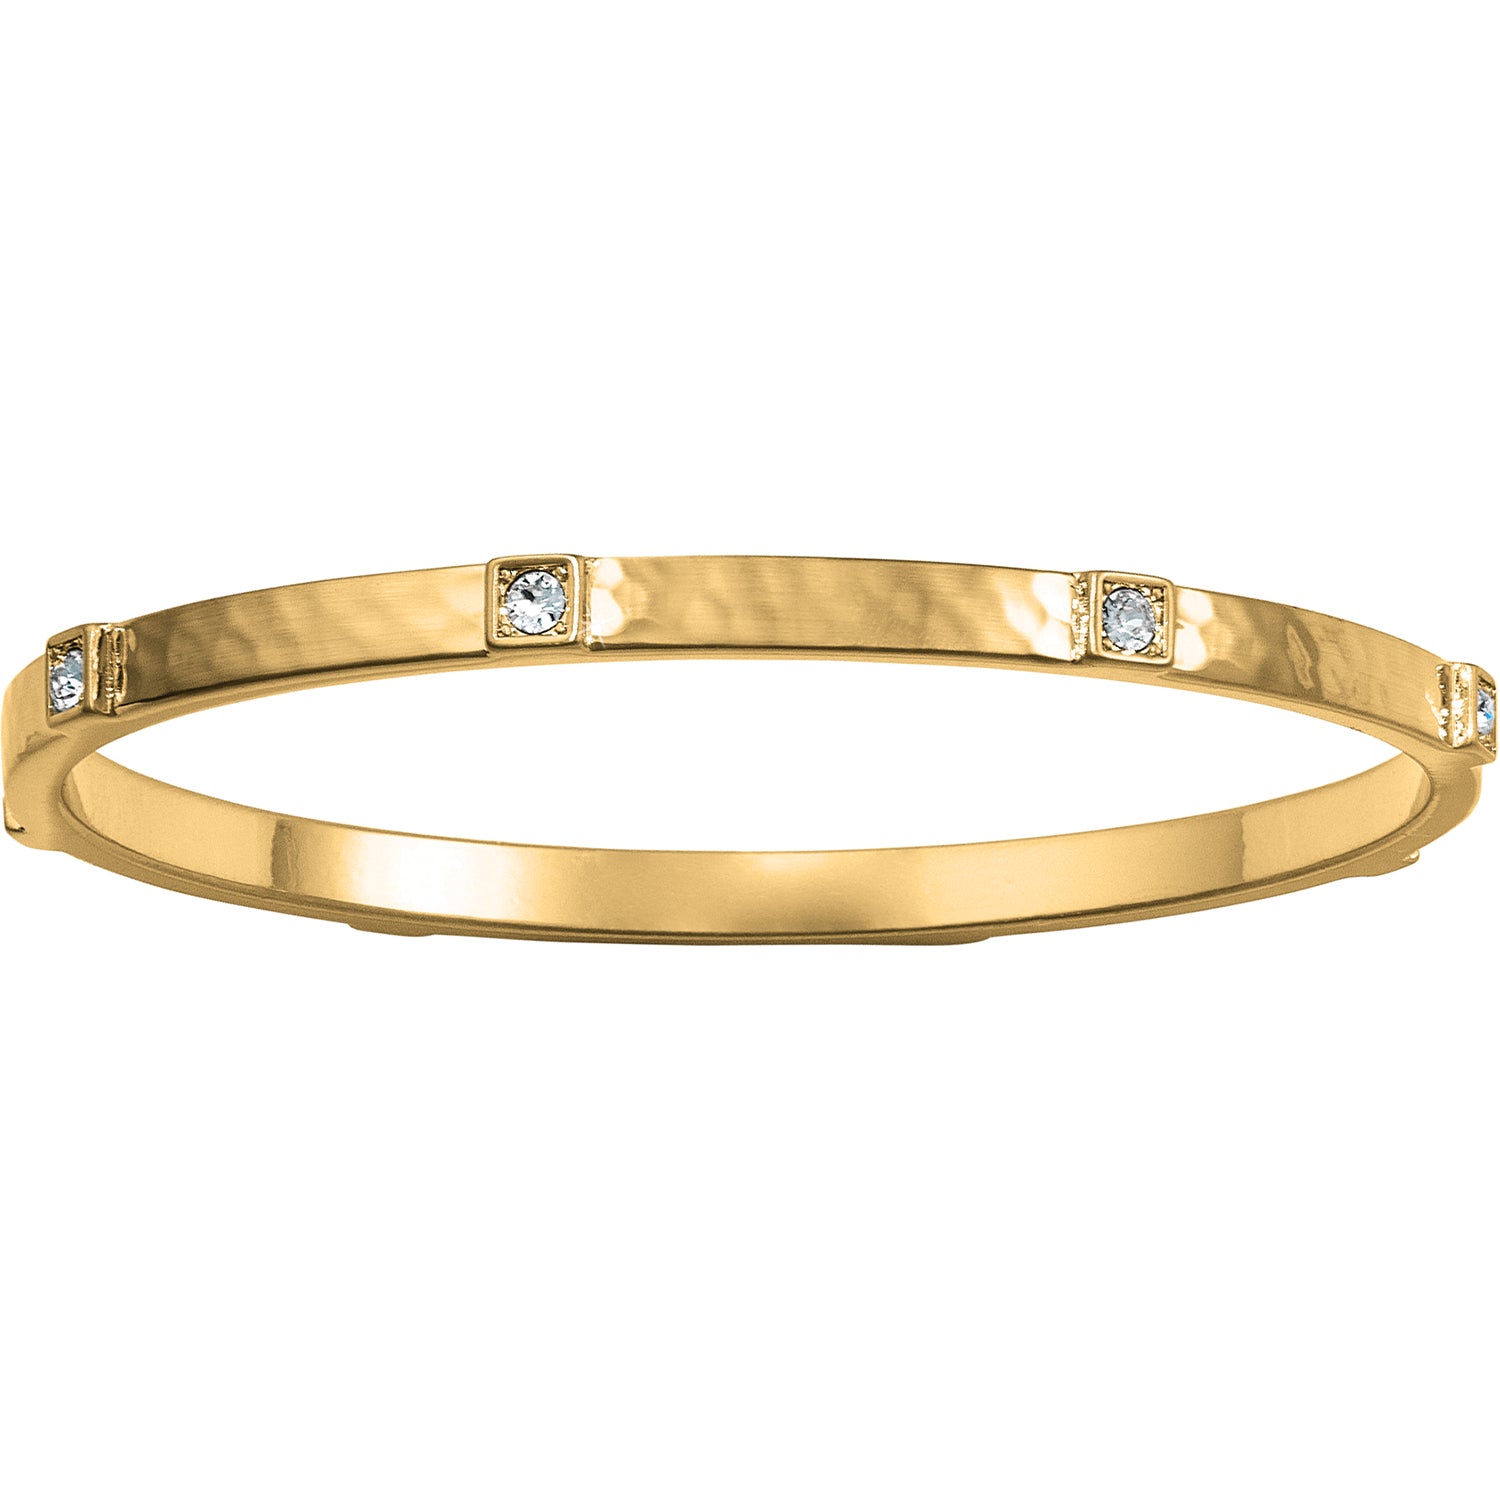 Meridian Zenith Station Bangle Gold - Jewelry - SierraLily